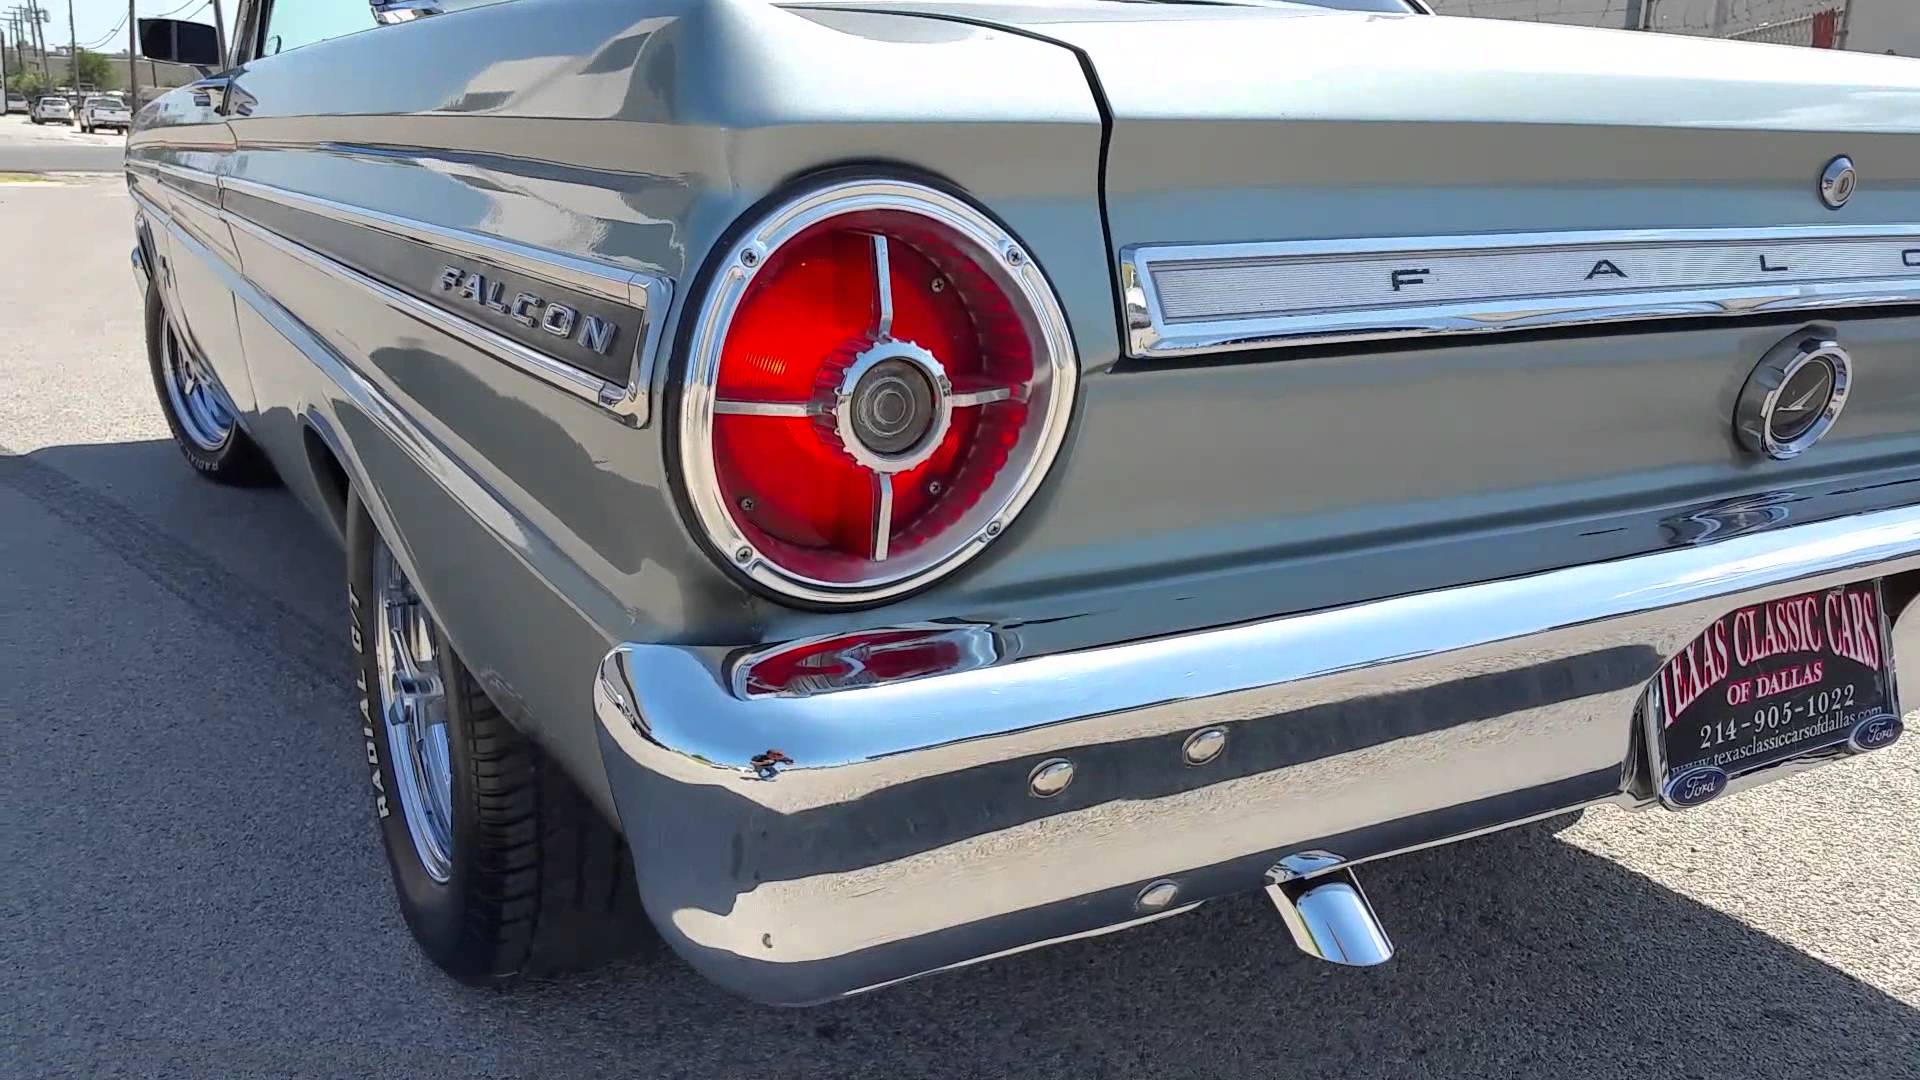 1965 Ford Falcon Sprint 289 Classic - YouTube